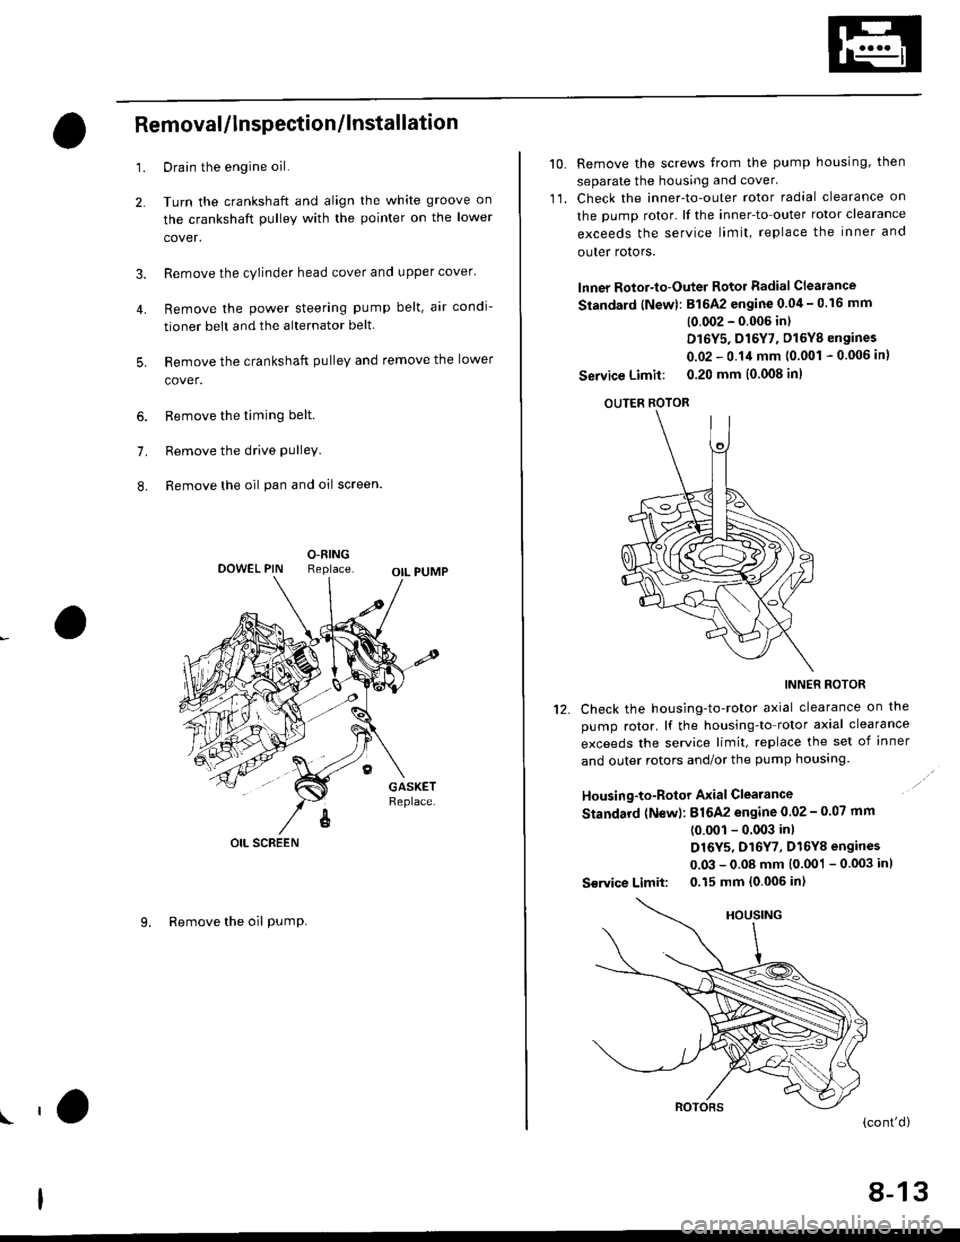 HONDA CIVIC 1999 6.G Workshop Manual 4.
Removal/lnspection/lnstallation
2.
3.
1.
5.
6.
1.
8.
Drain the engine oil.
Turn the crankshaft and align the white groove on
the crankshaft pulley with the pointer on the lower
cover.
Remove the cy